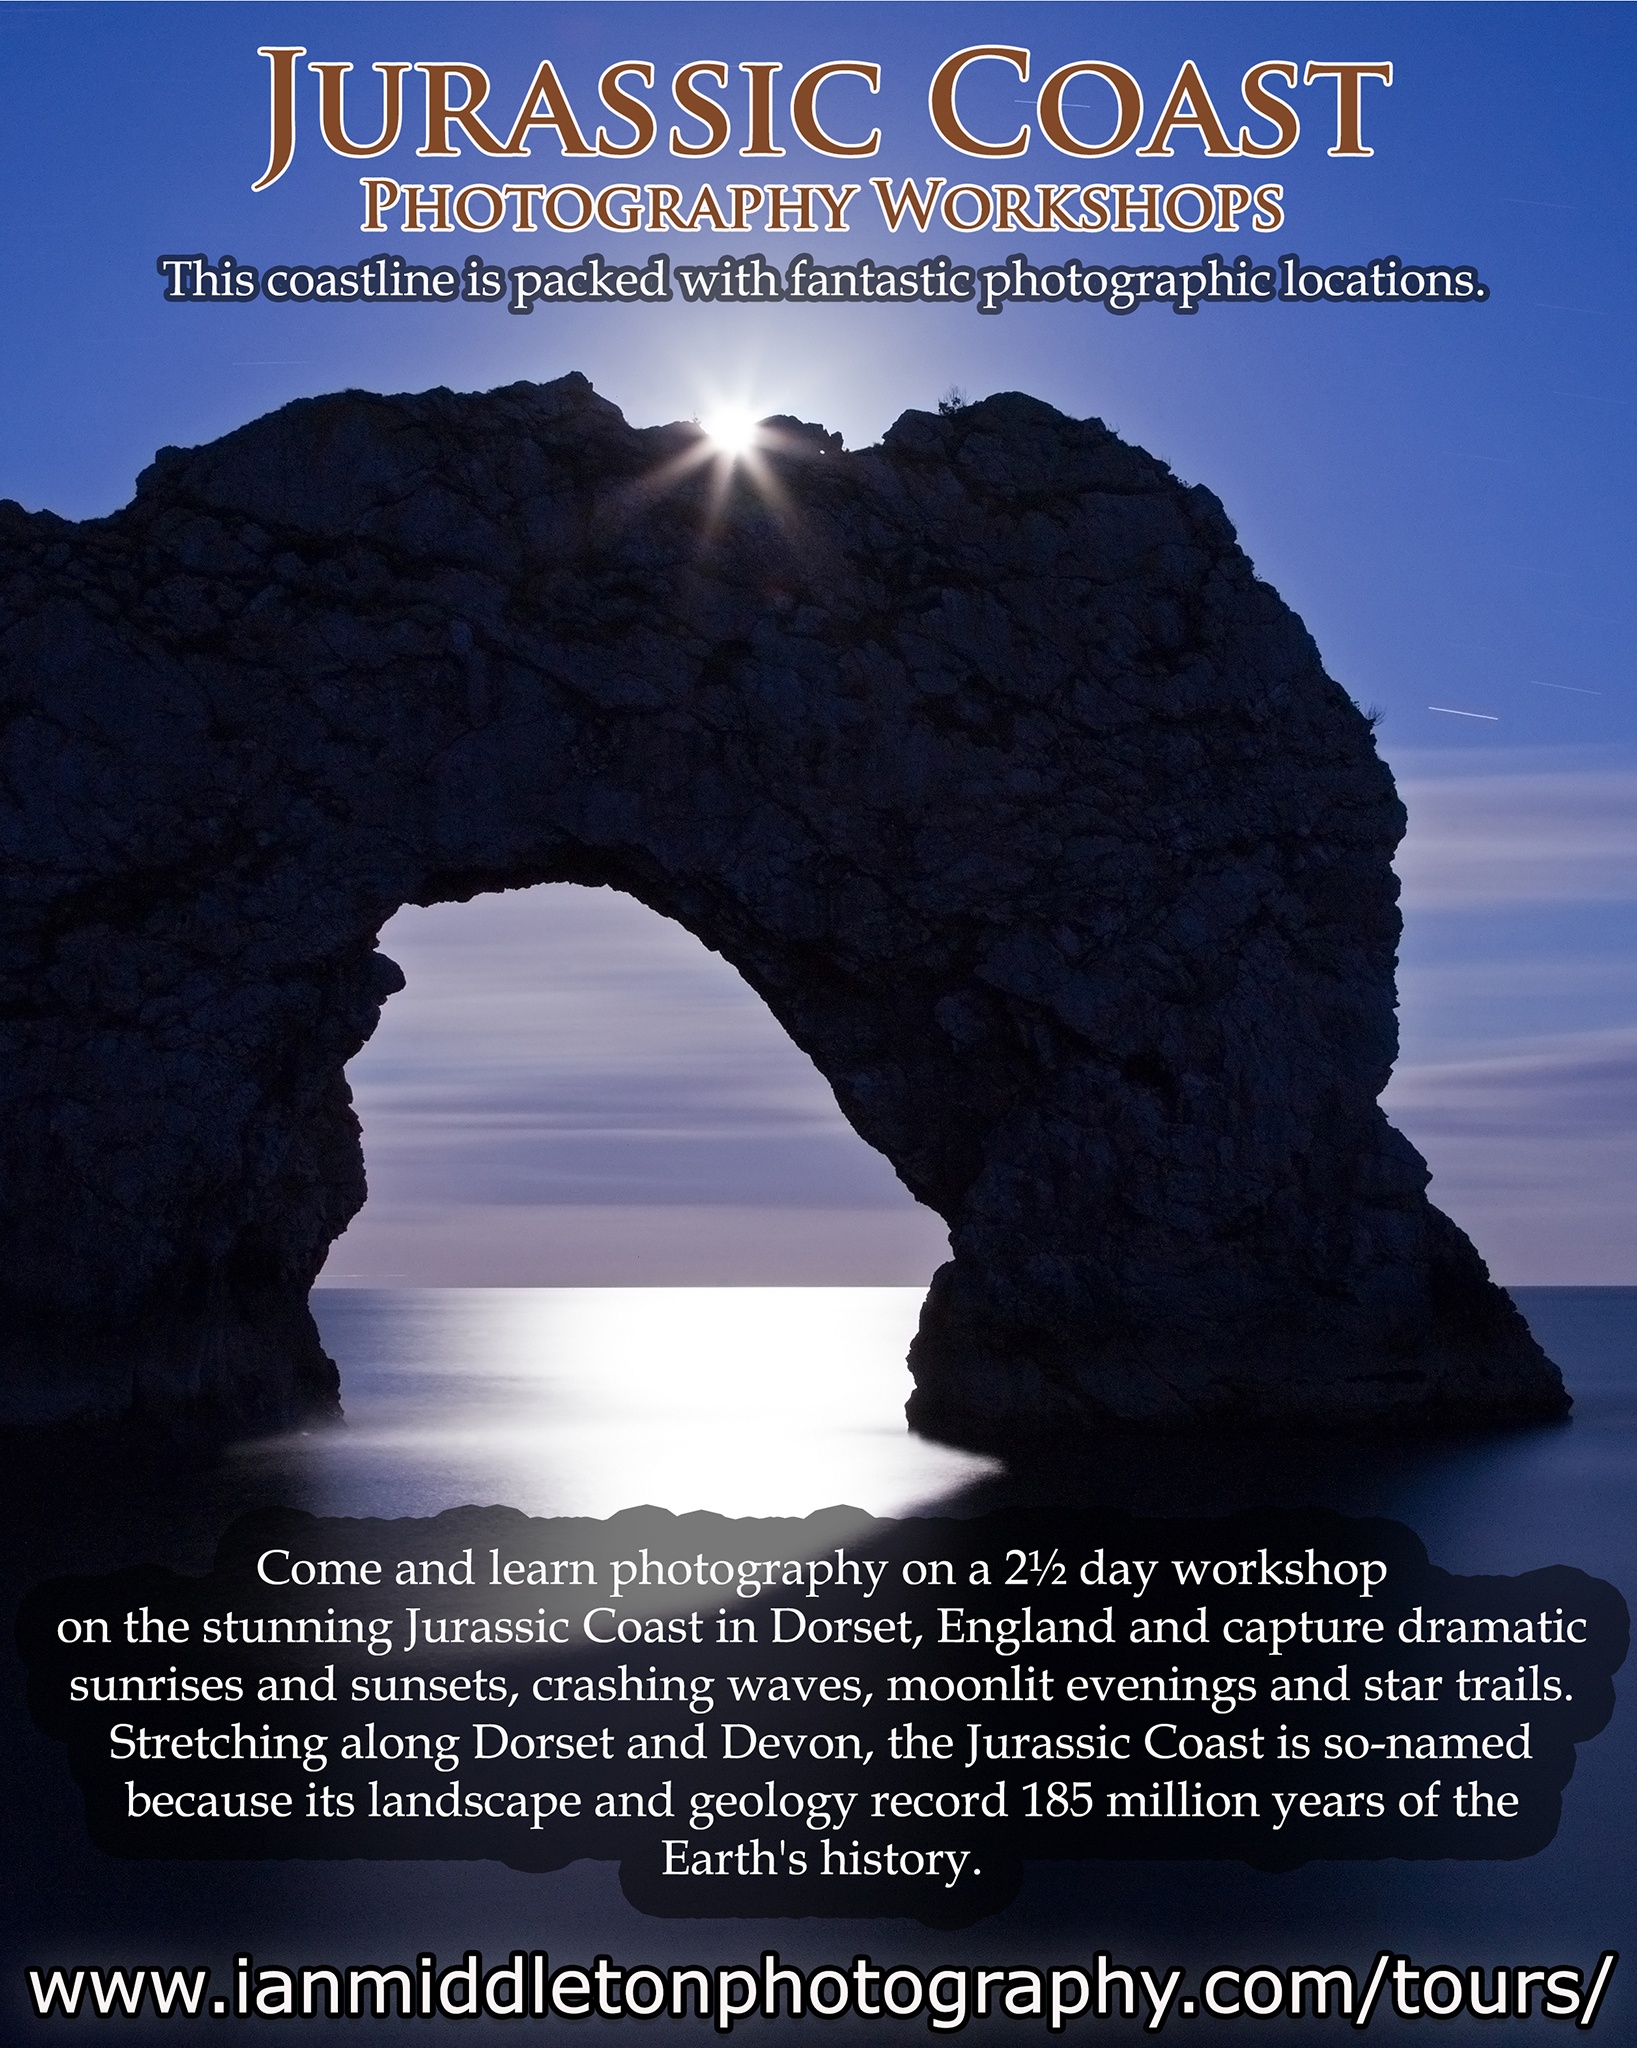 I run regular weekend workshops on the Jurassic Coast. Click here for more details on how to join